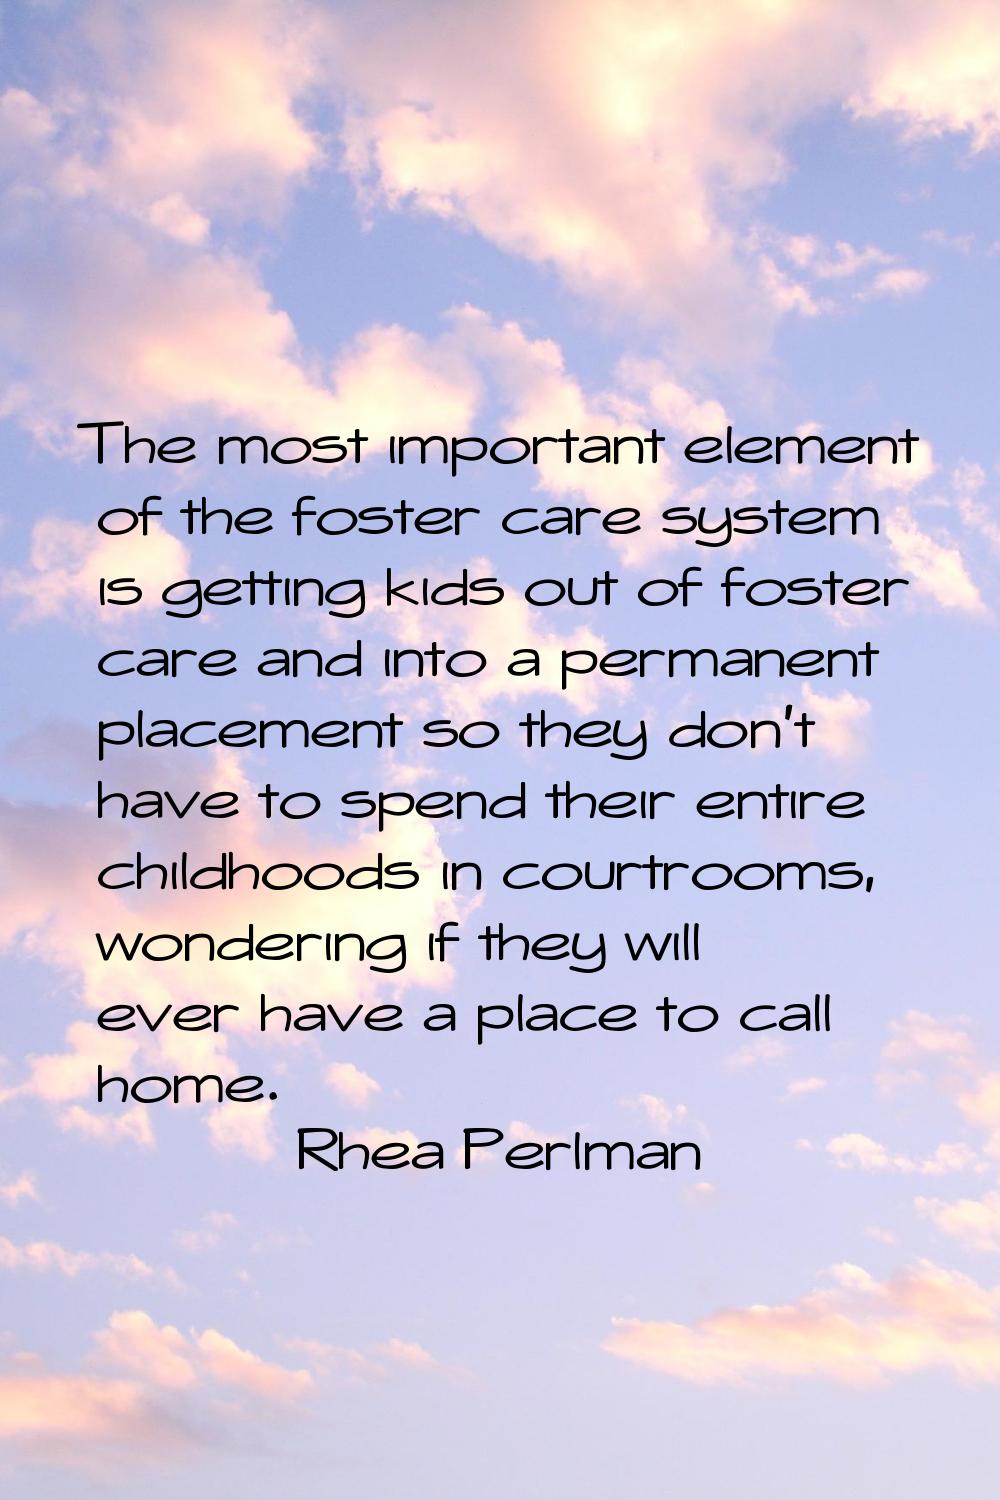 The most important element of the foster care system is getting kids out of foster care and into a 